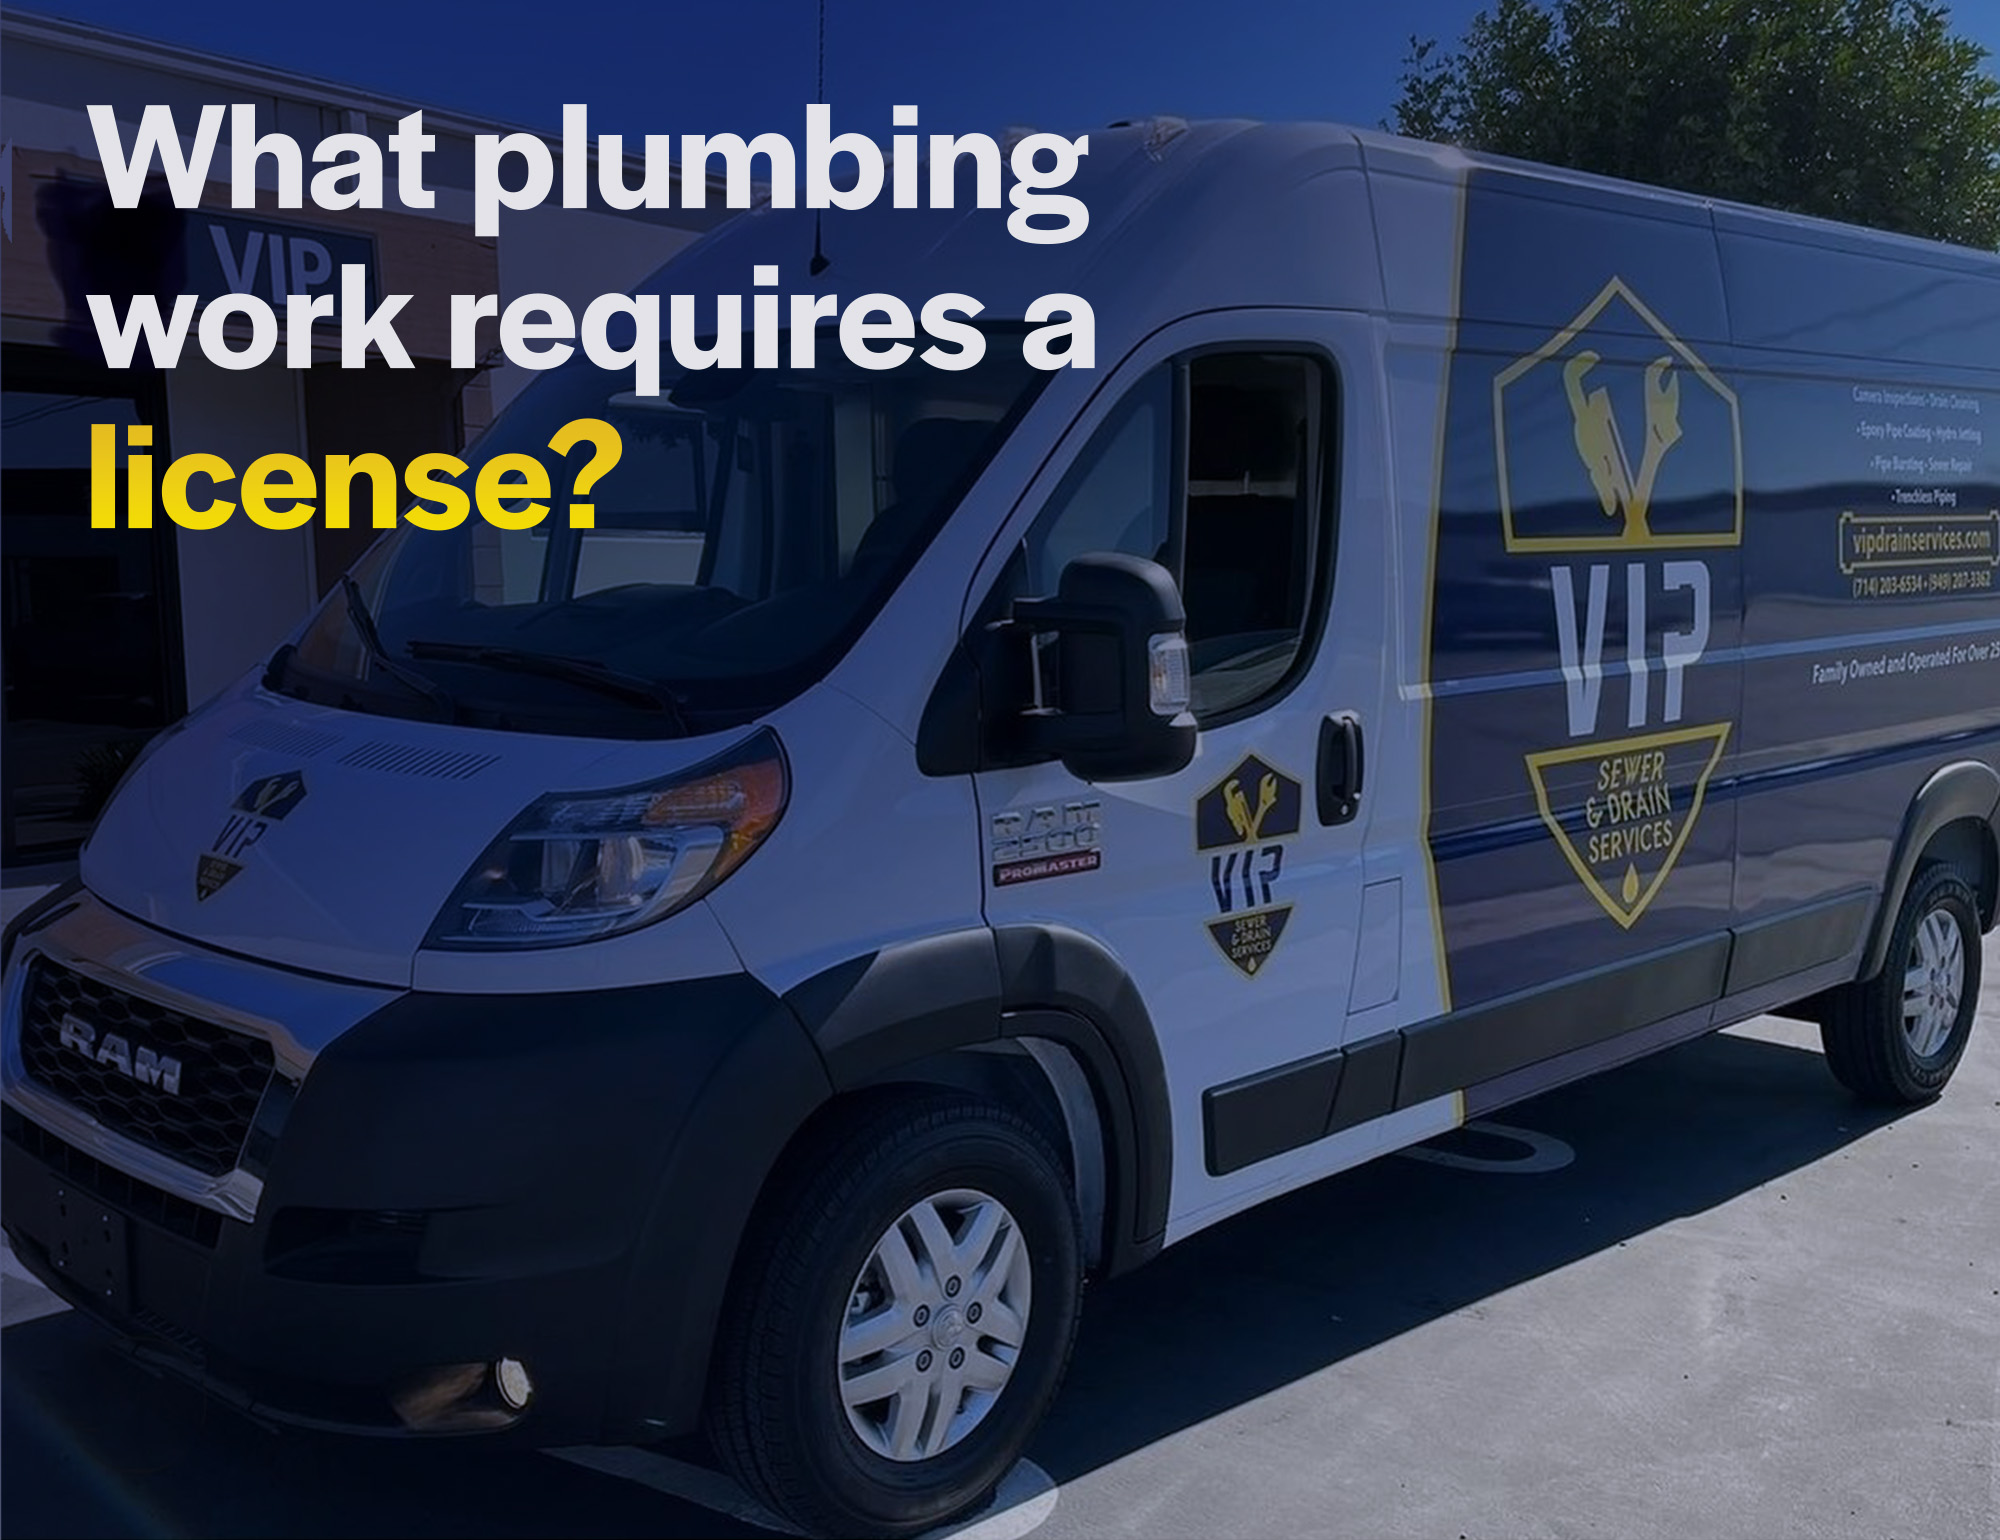 What plumbing work requires a license?